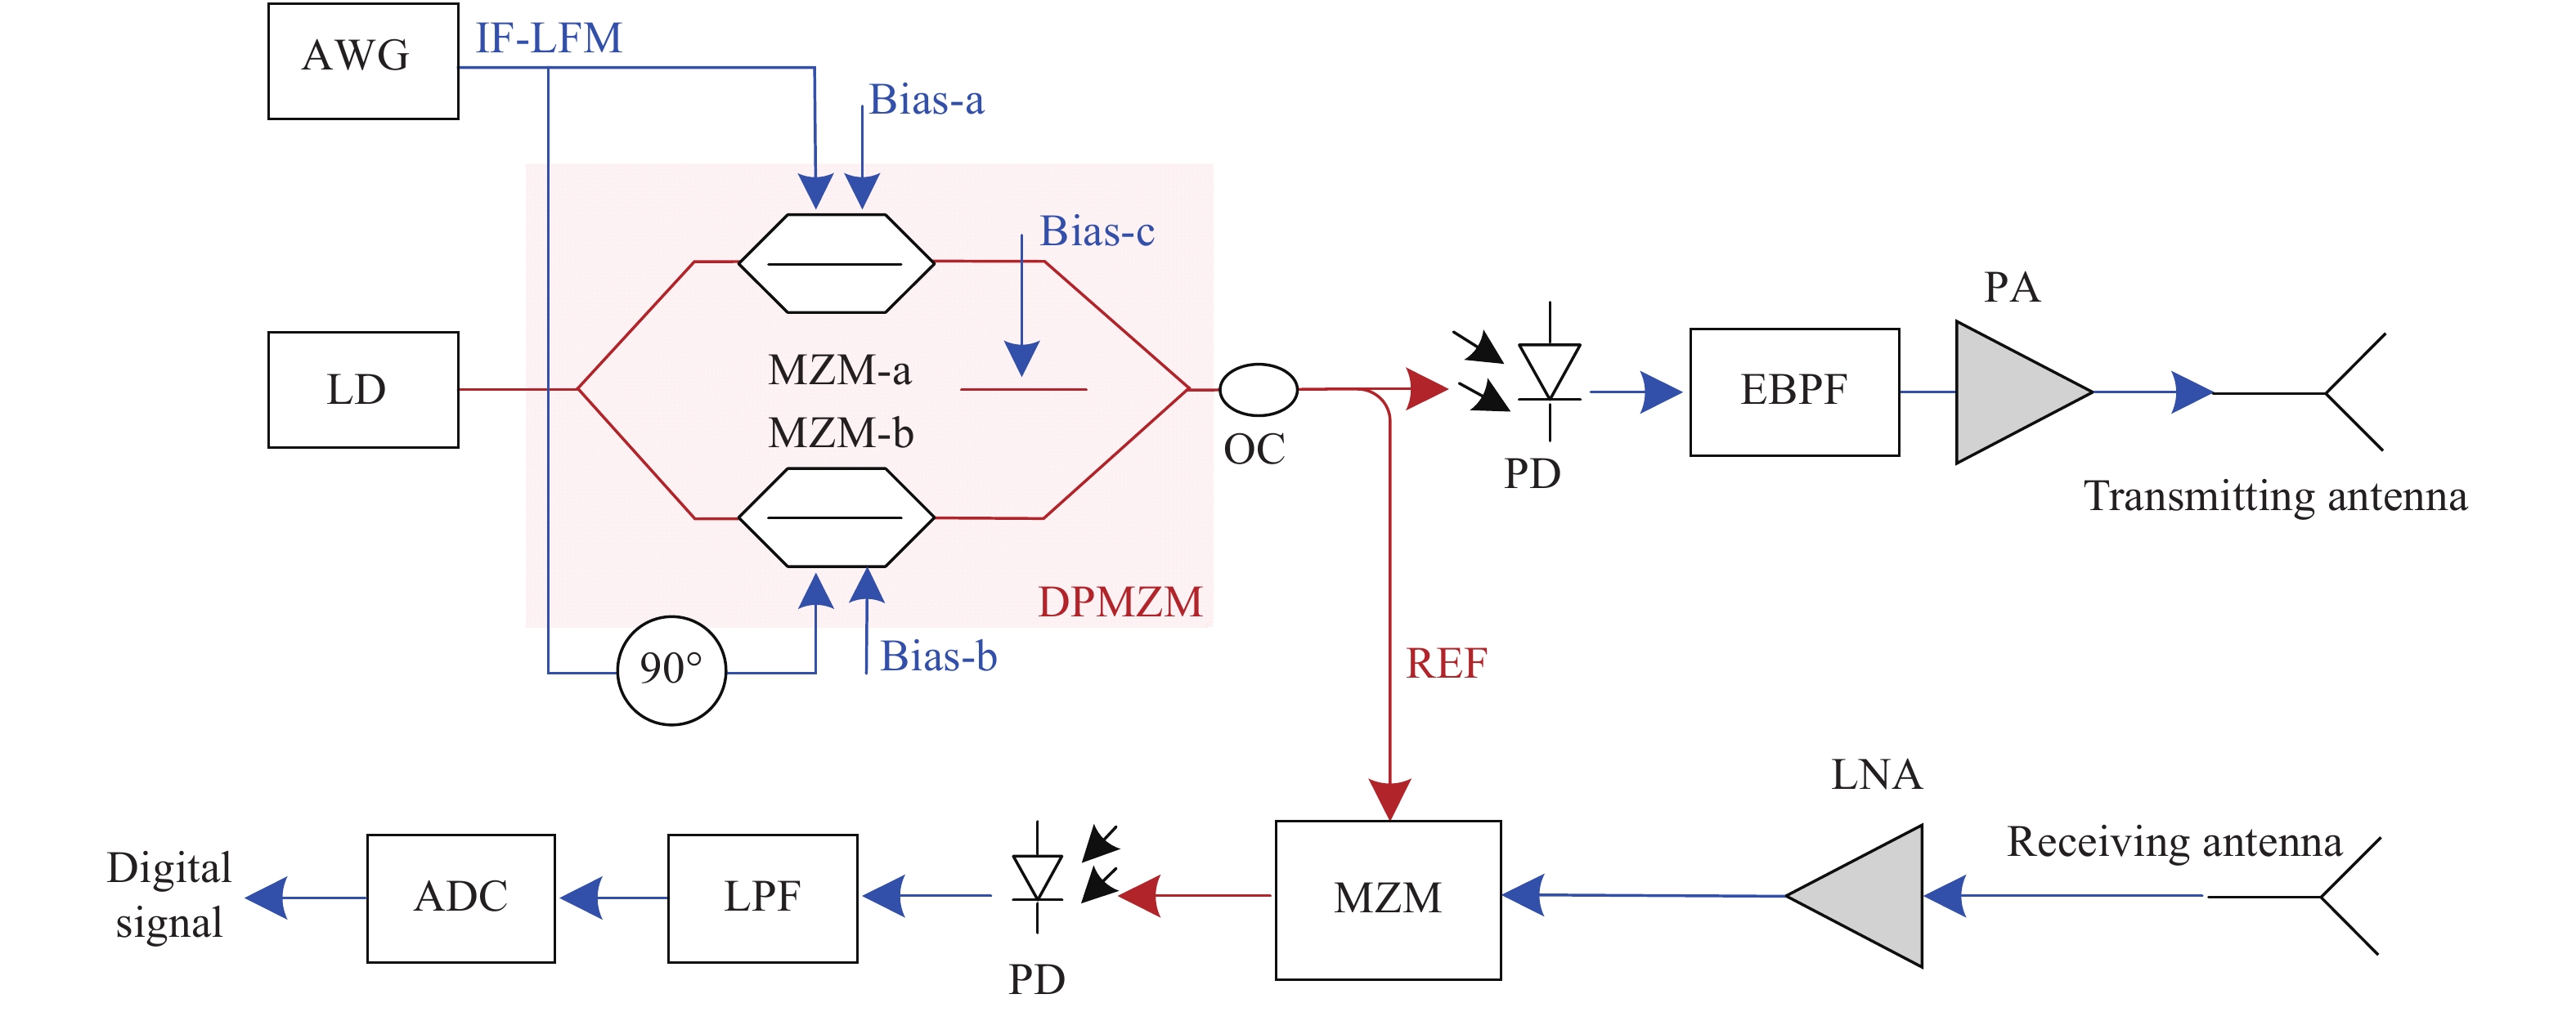 The broadband radar transceiver based on microwave photonic frequency multiplication and de-chirp receiving